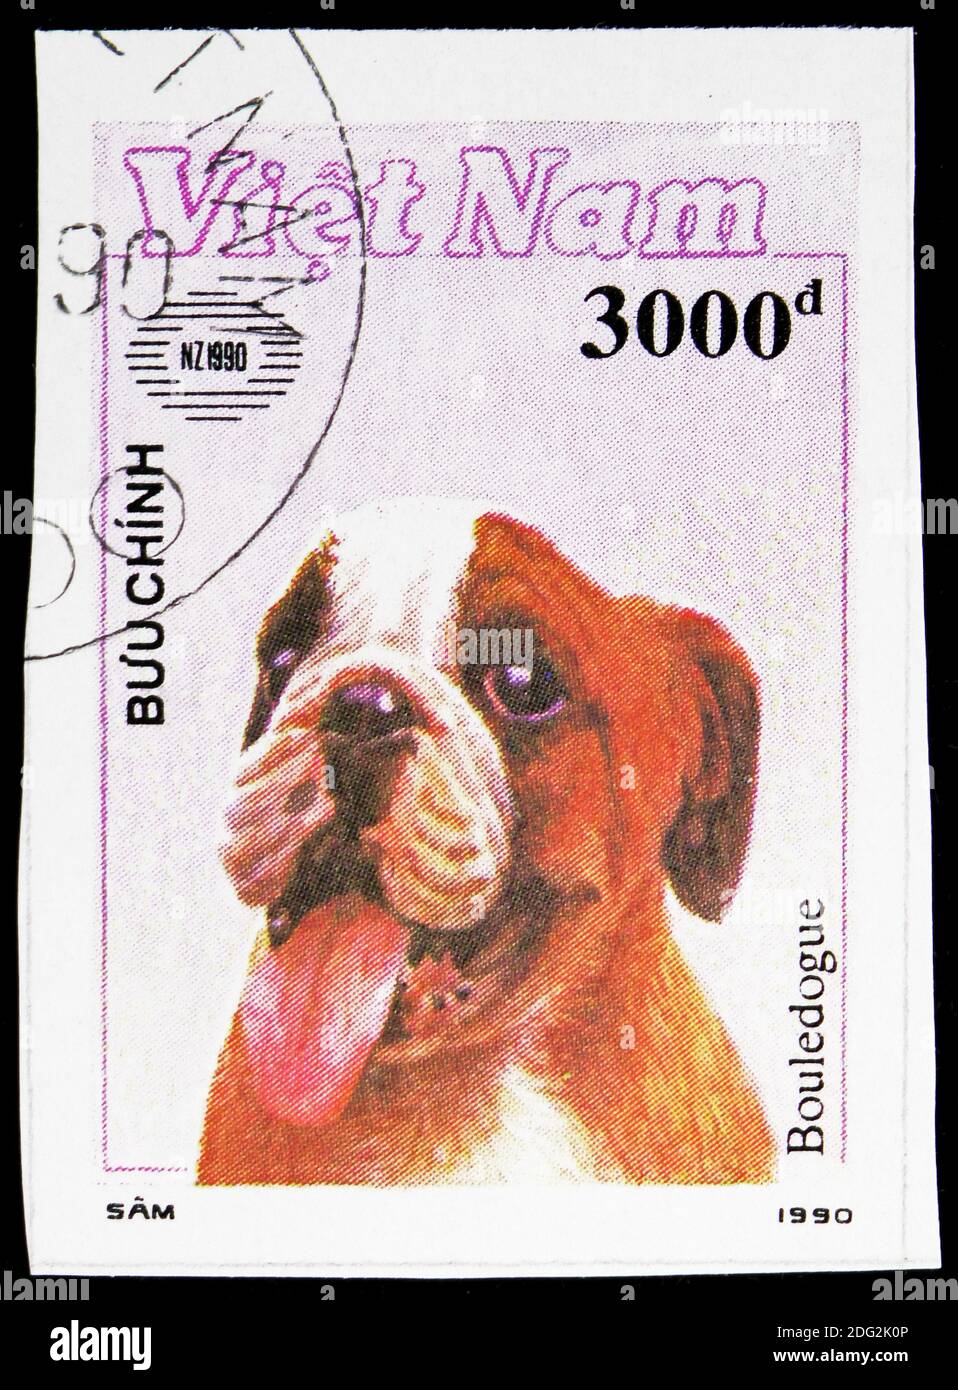 MOSCOW, RUSSIA - NOVEMBER 10, 2018: A stamp printed in Vietnam shows English Bulldog (Canis lupus familiaris), International stamp exhibition New Zeal Stock Photo